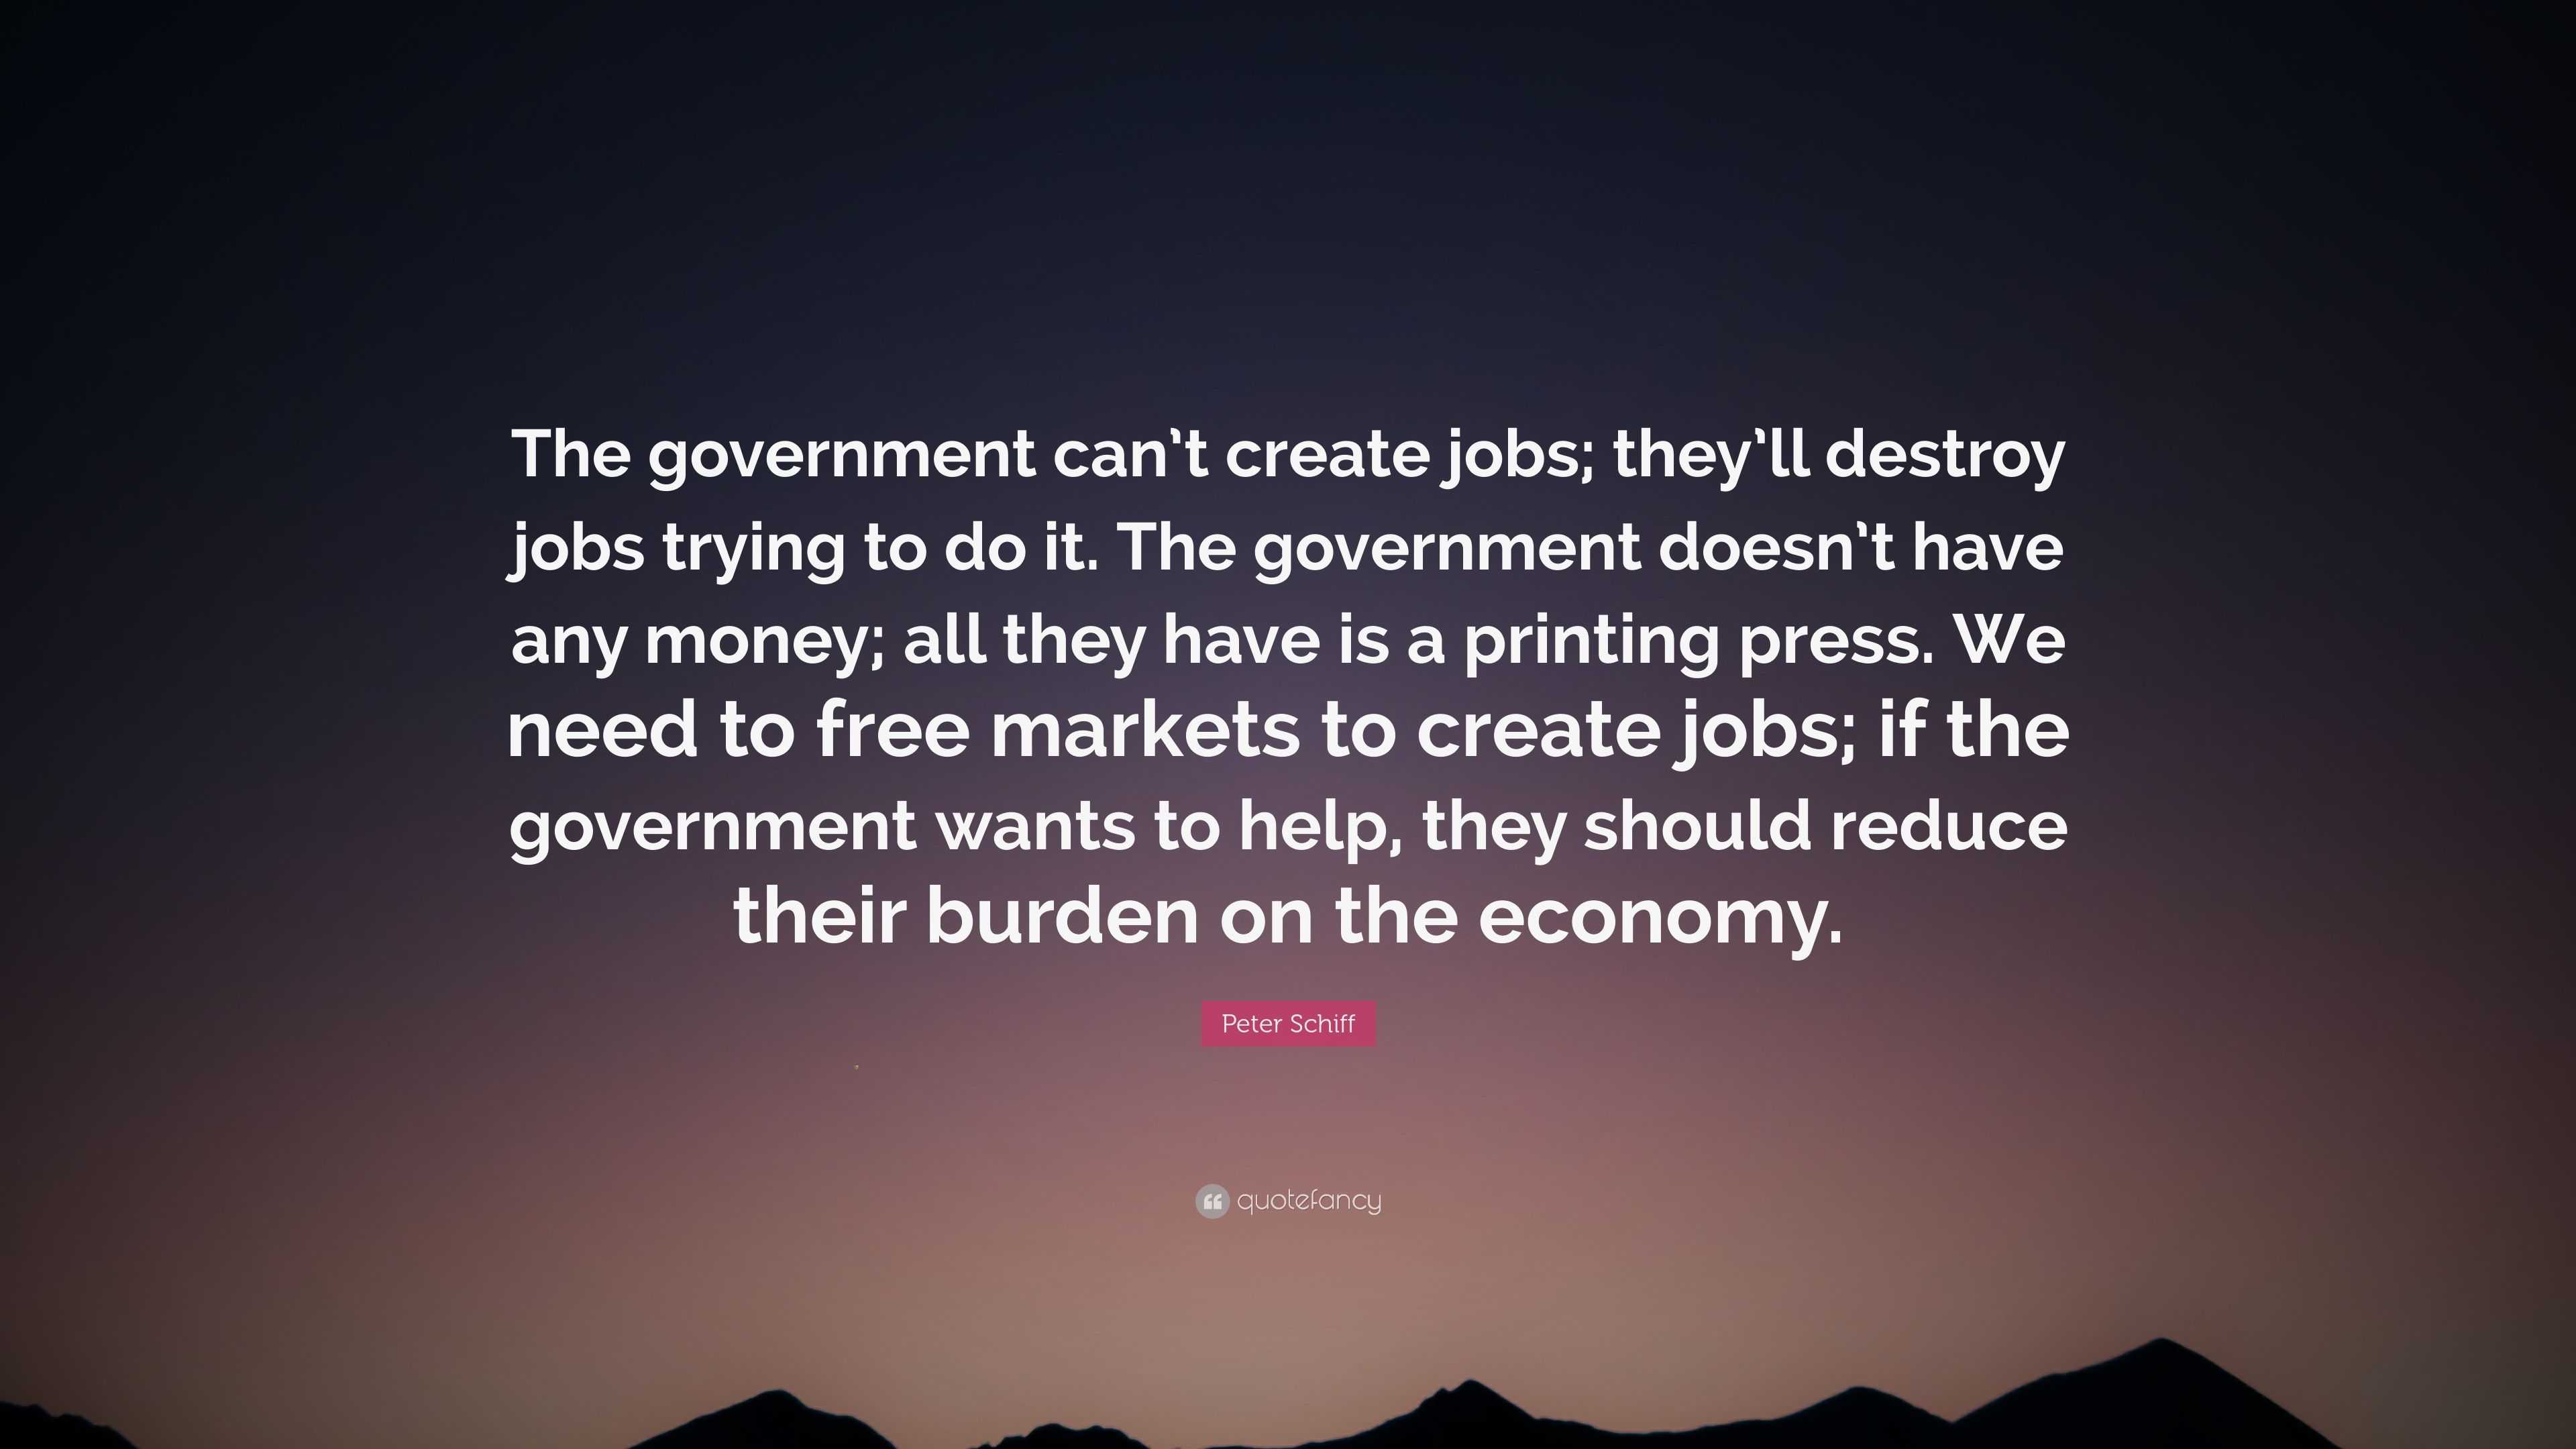 Peter Schiff Quote: “The government can't create jobs; they'll